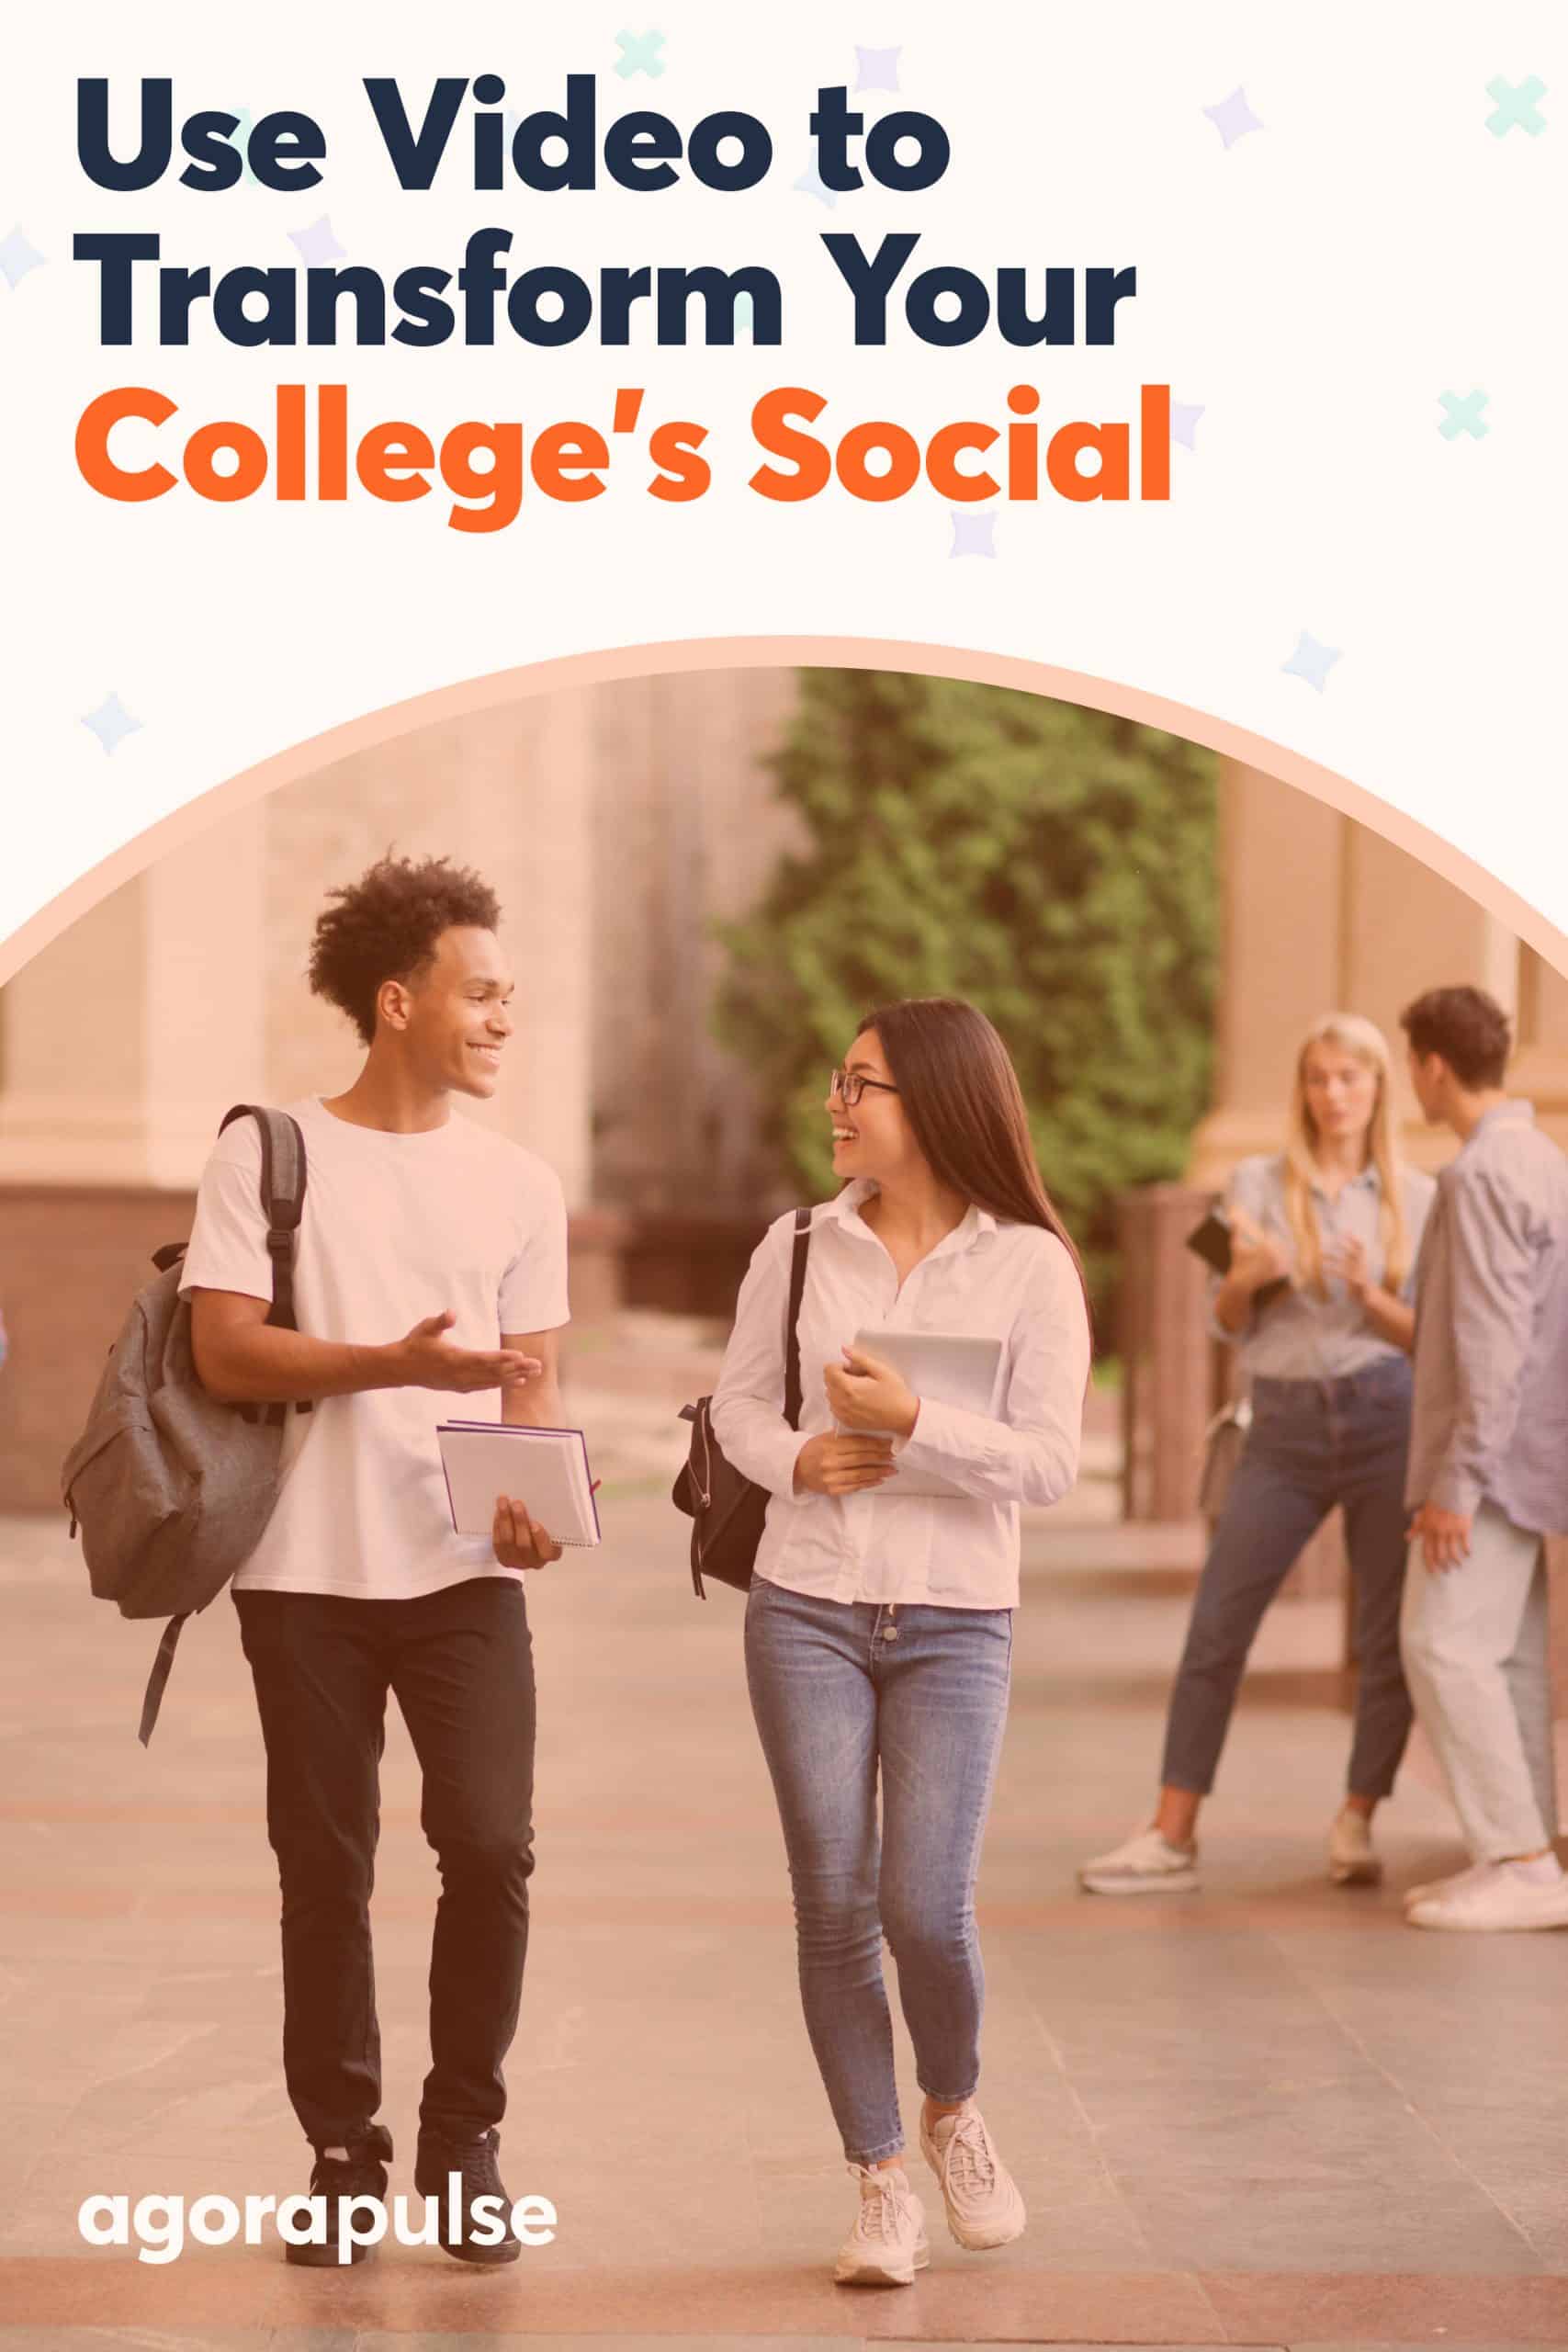 How to Transform Your College’s Social Media Strategy With Video